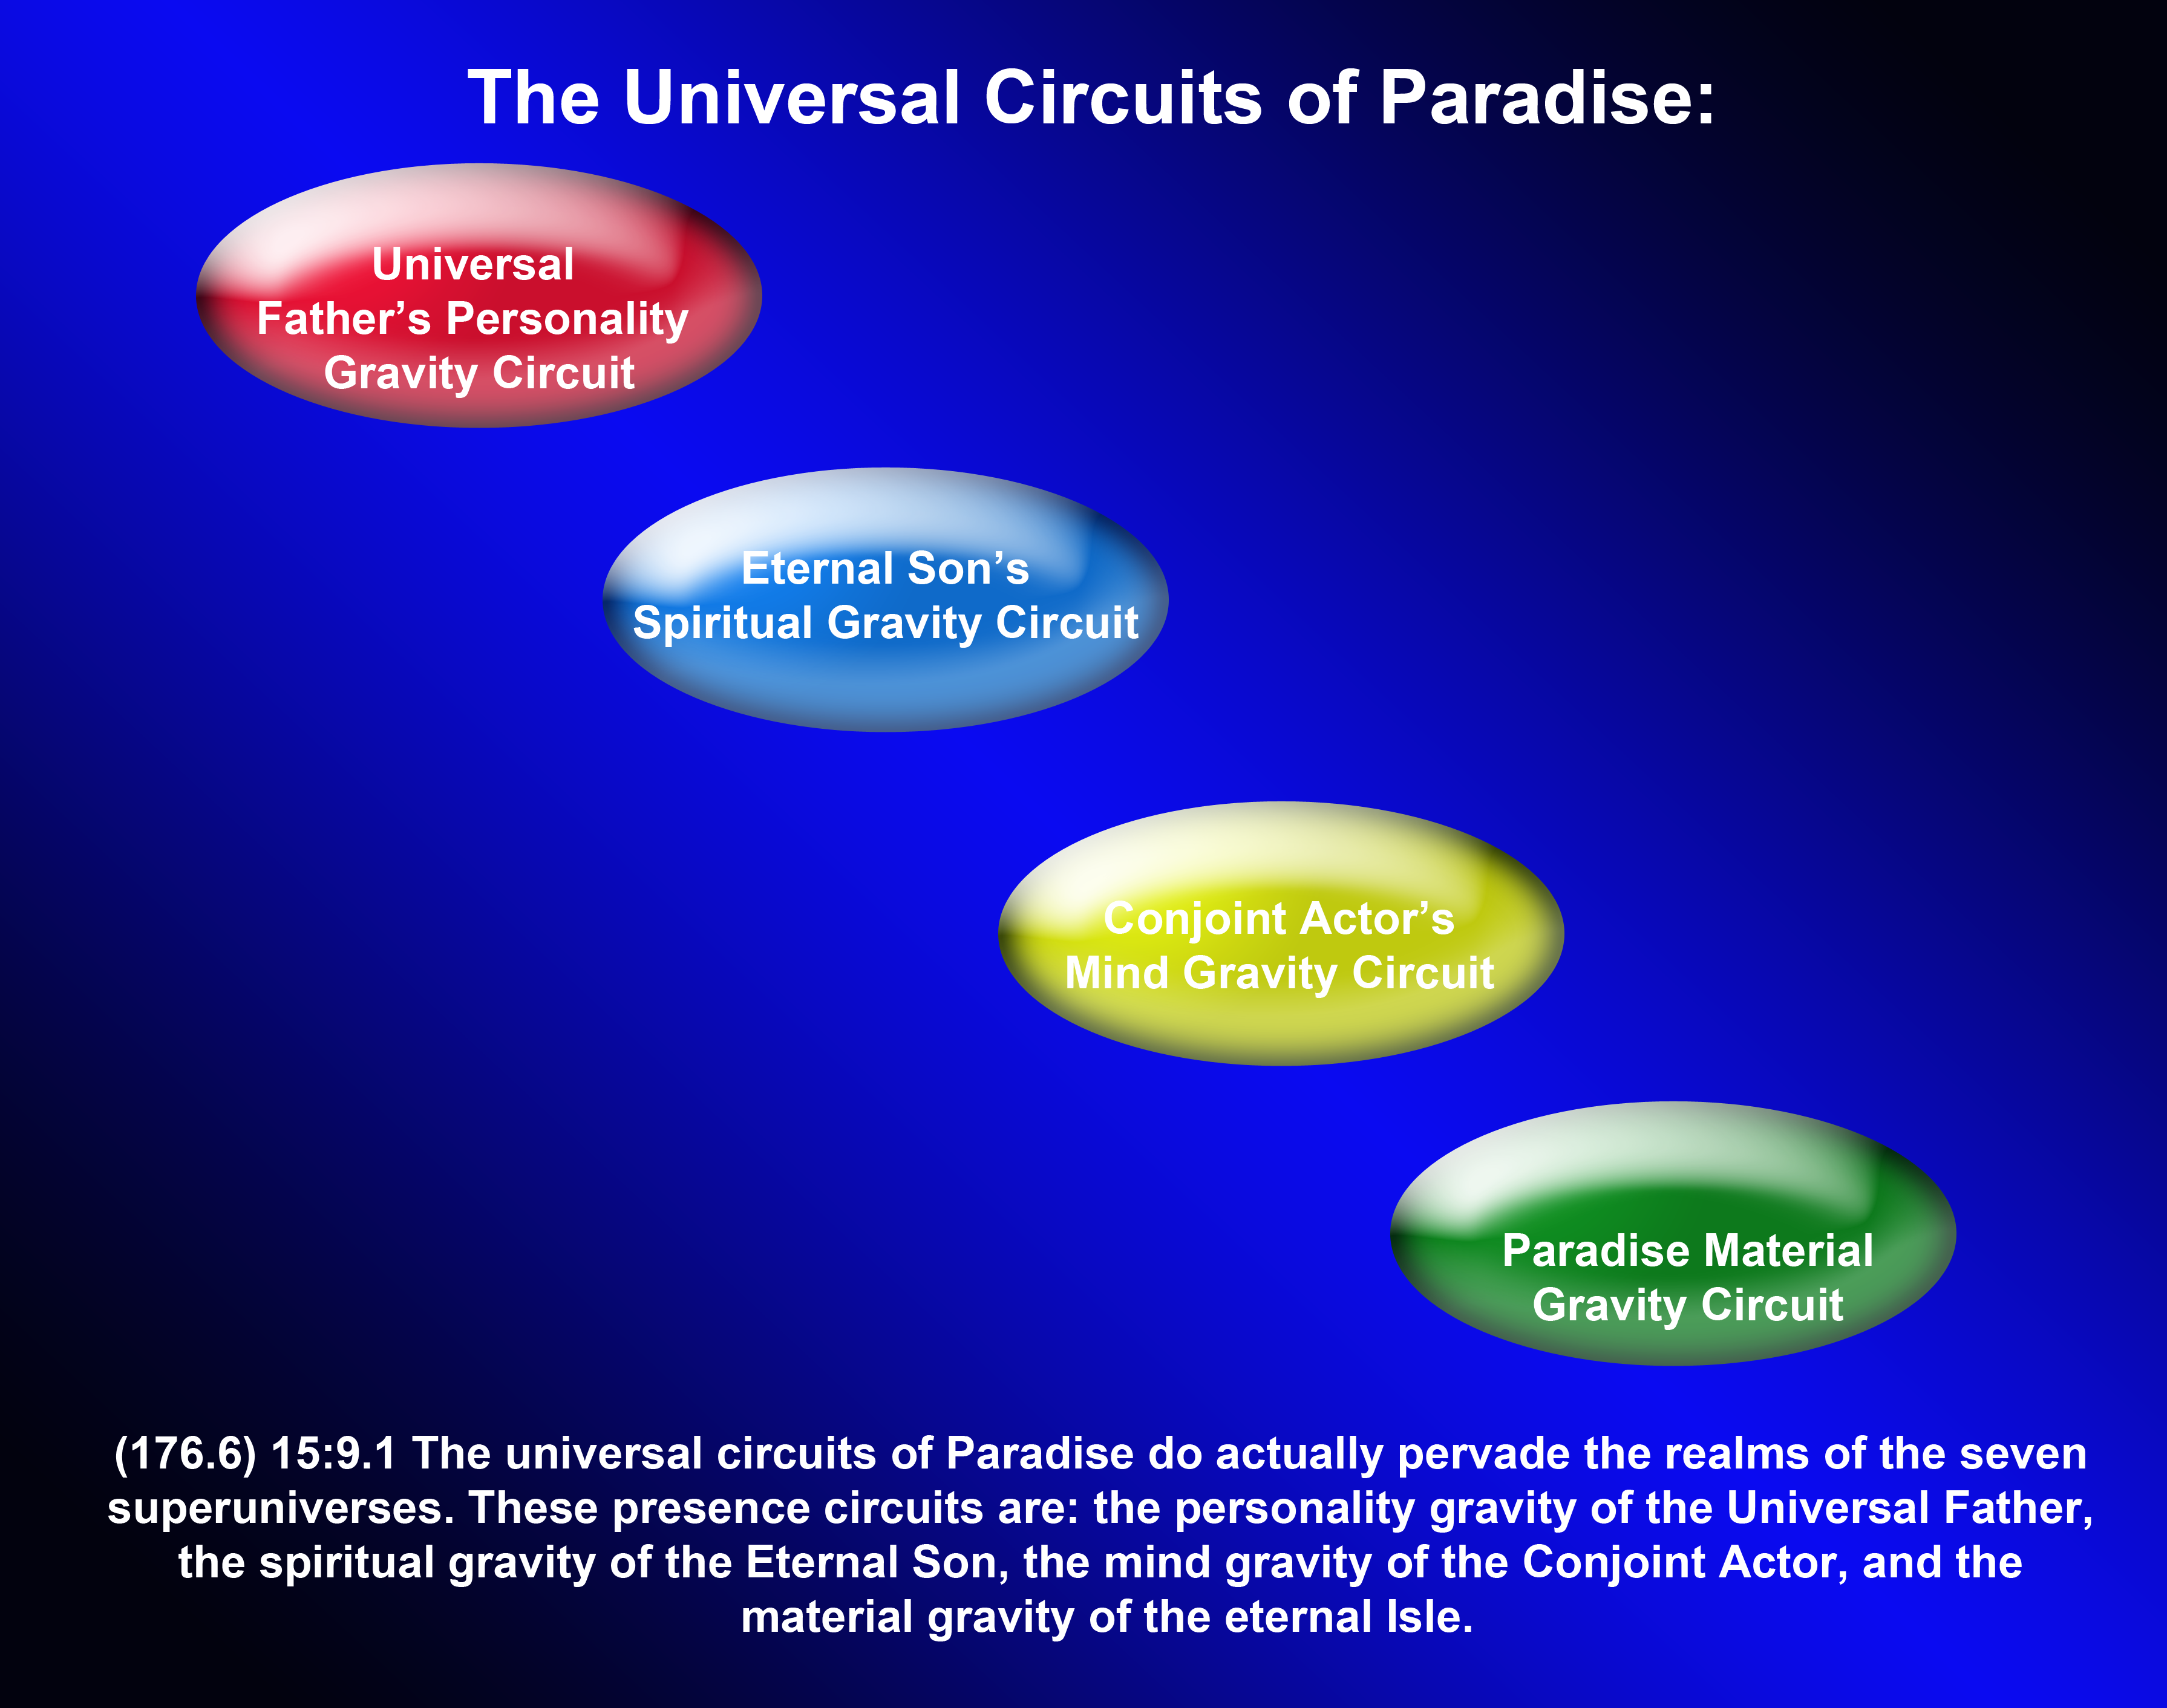 The Universe Circuits of Paradise